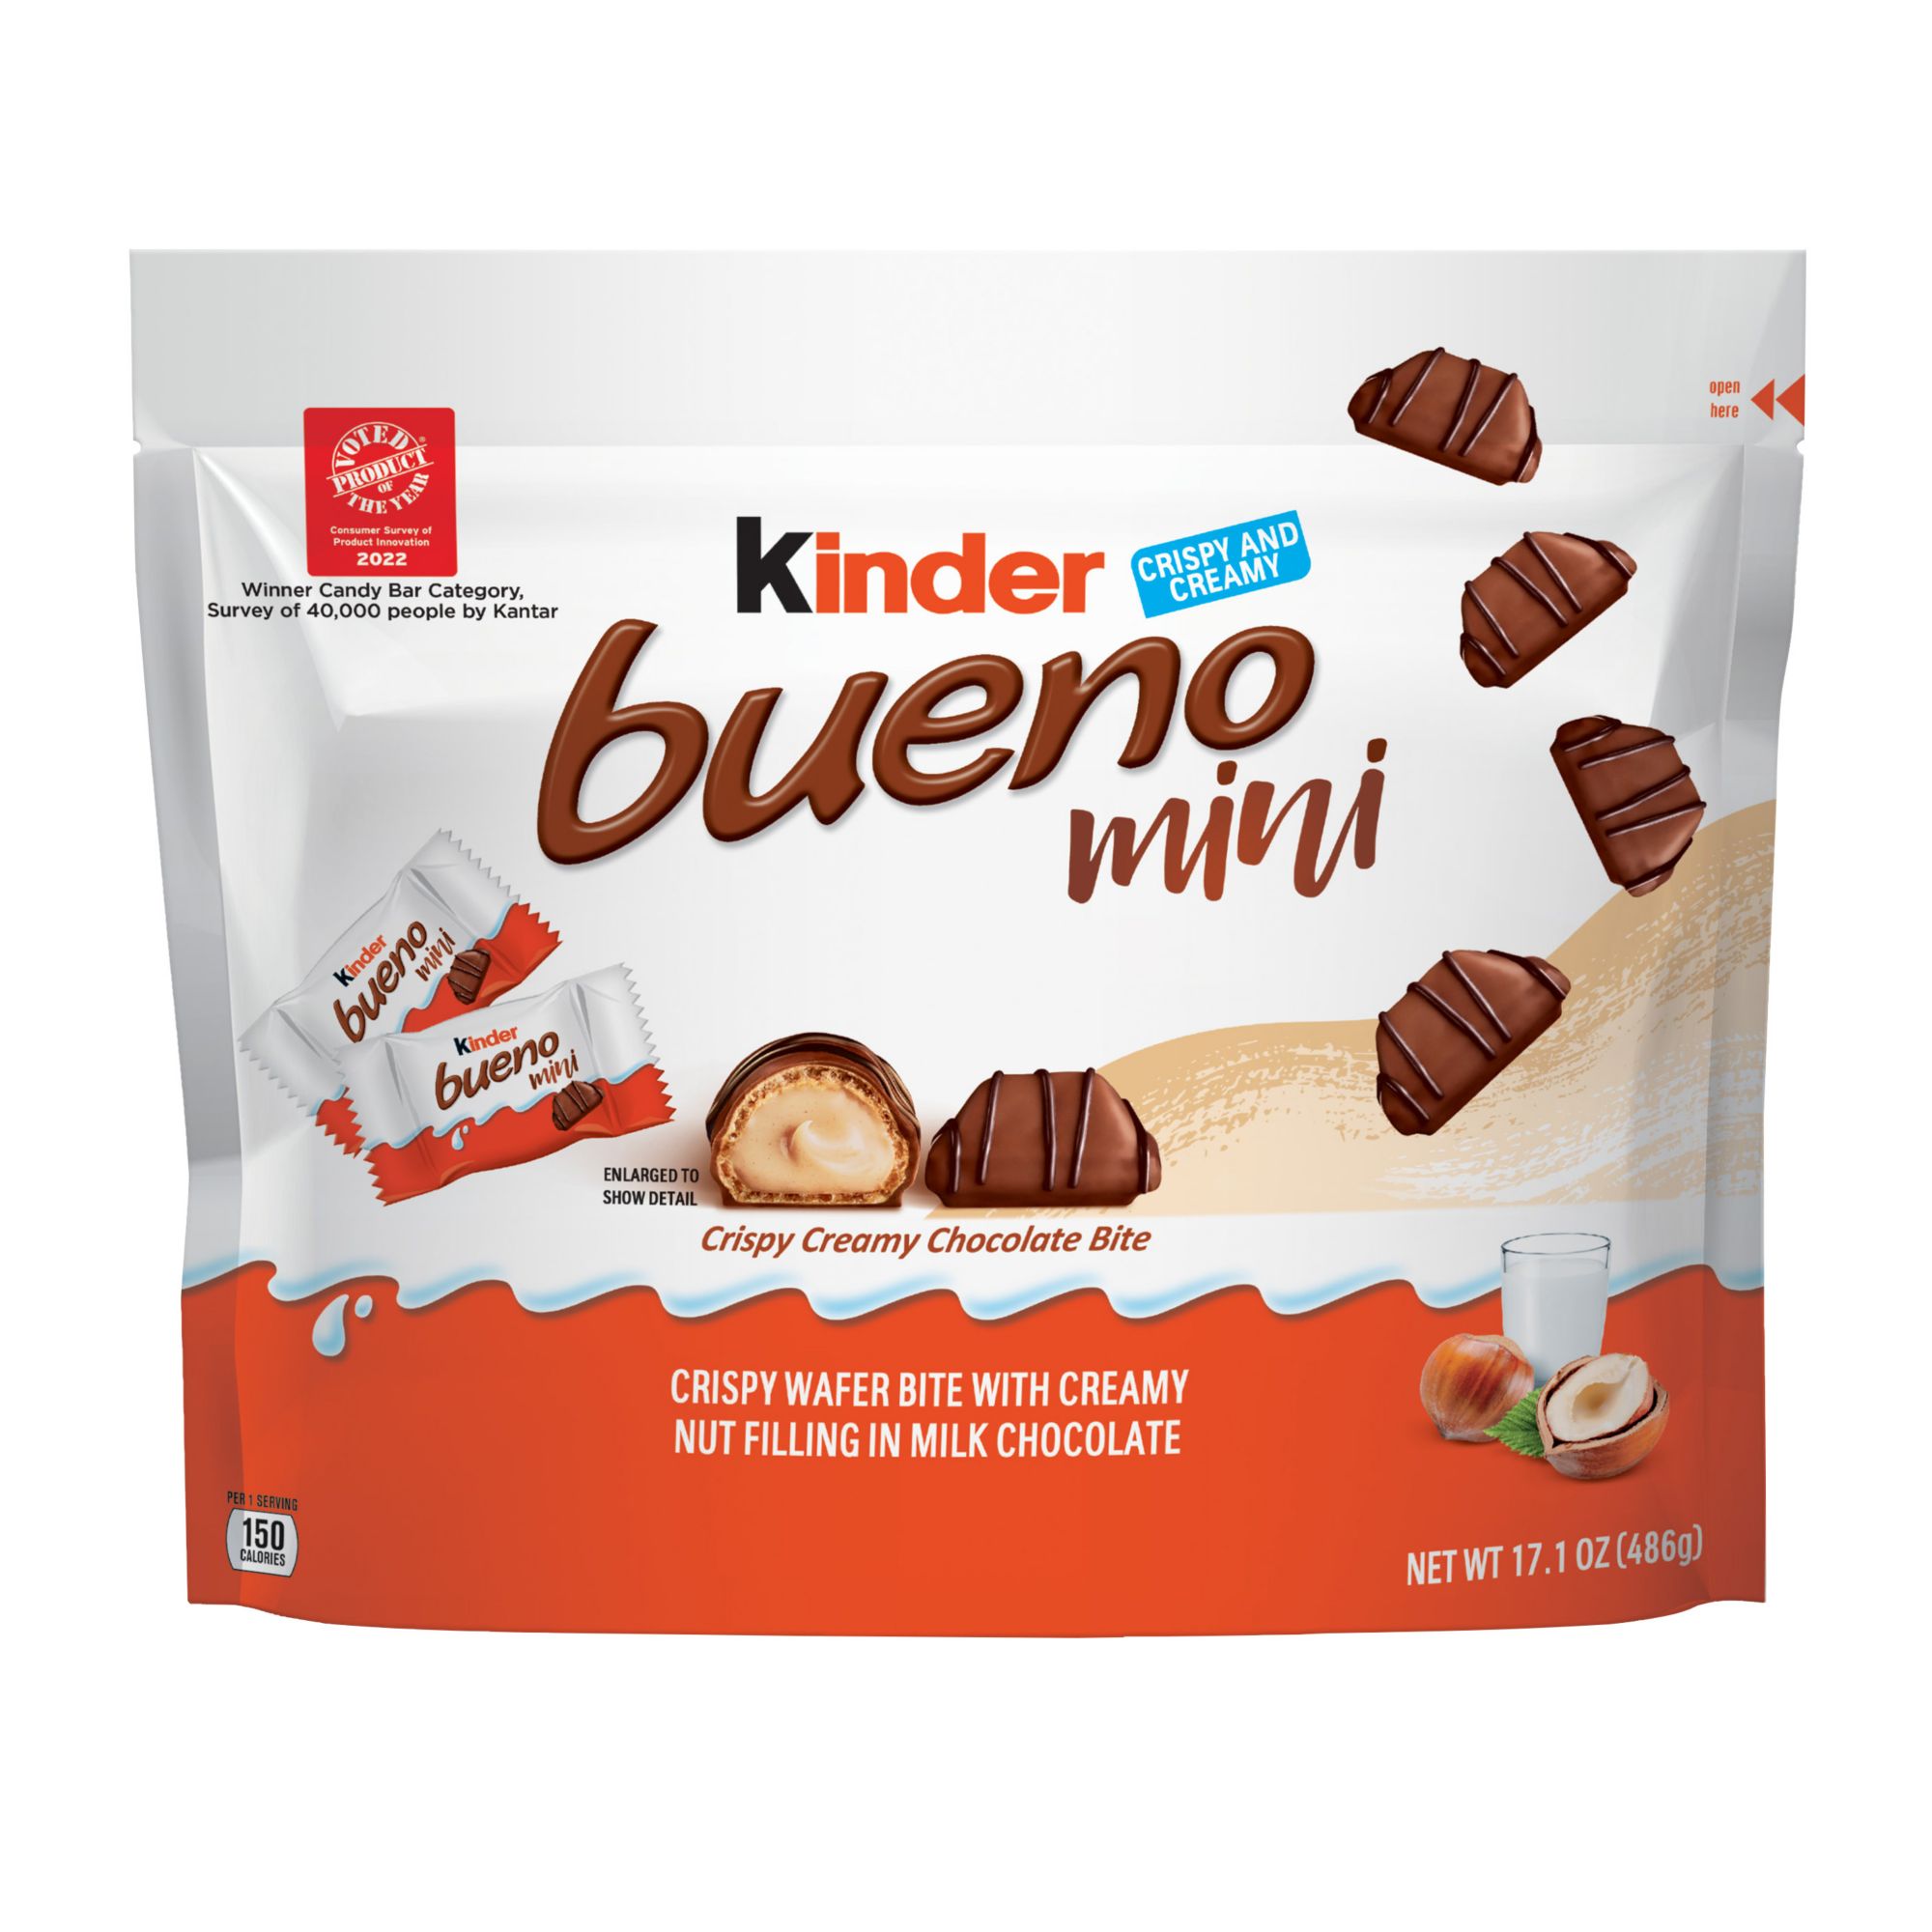 Kinder Bueno Photos, Images and Pictures